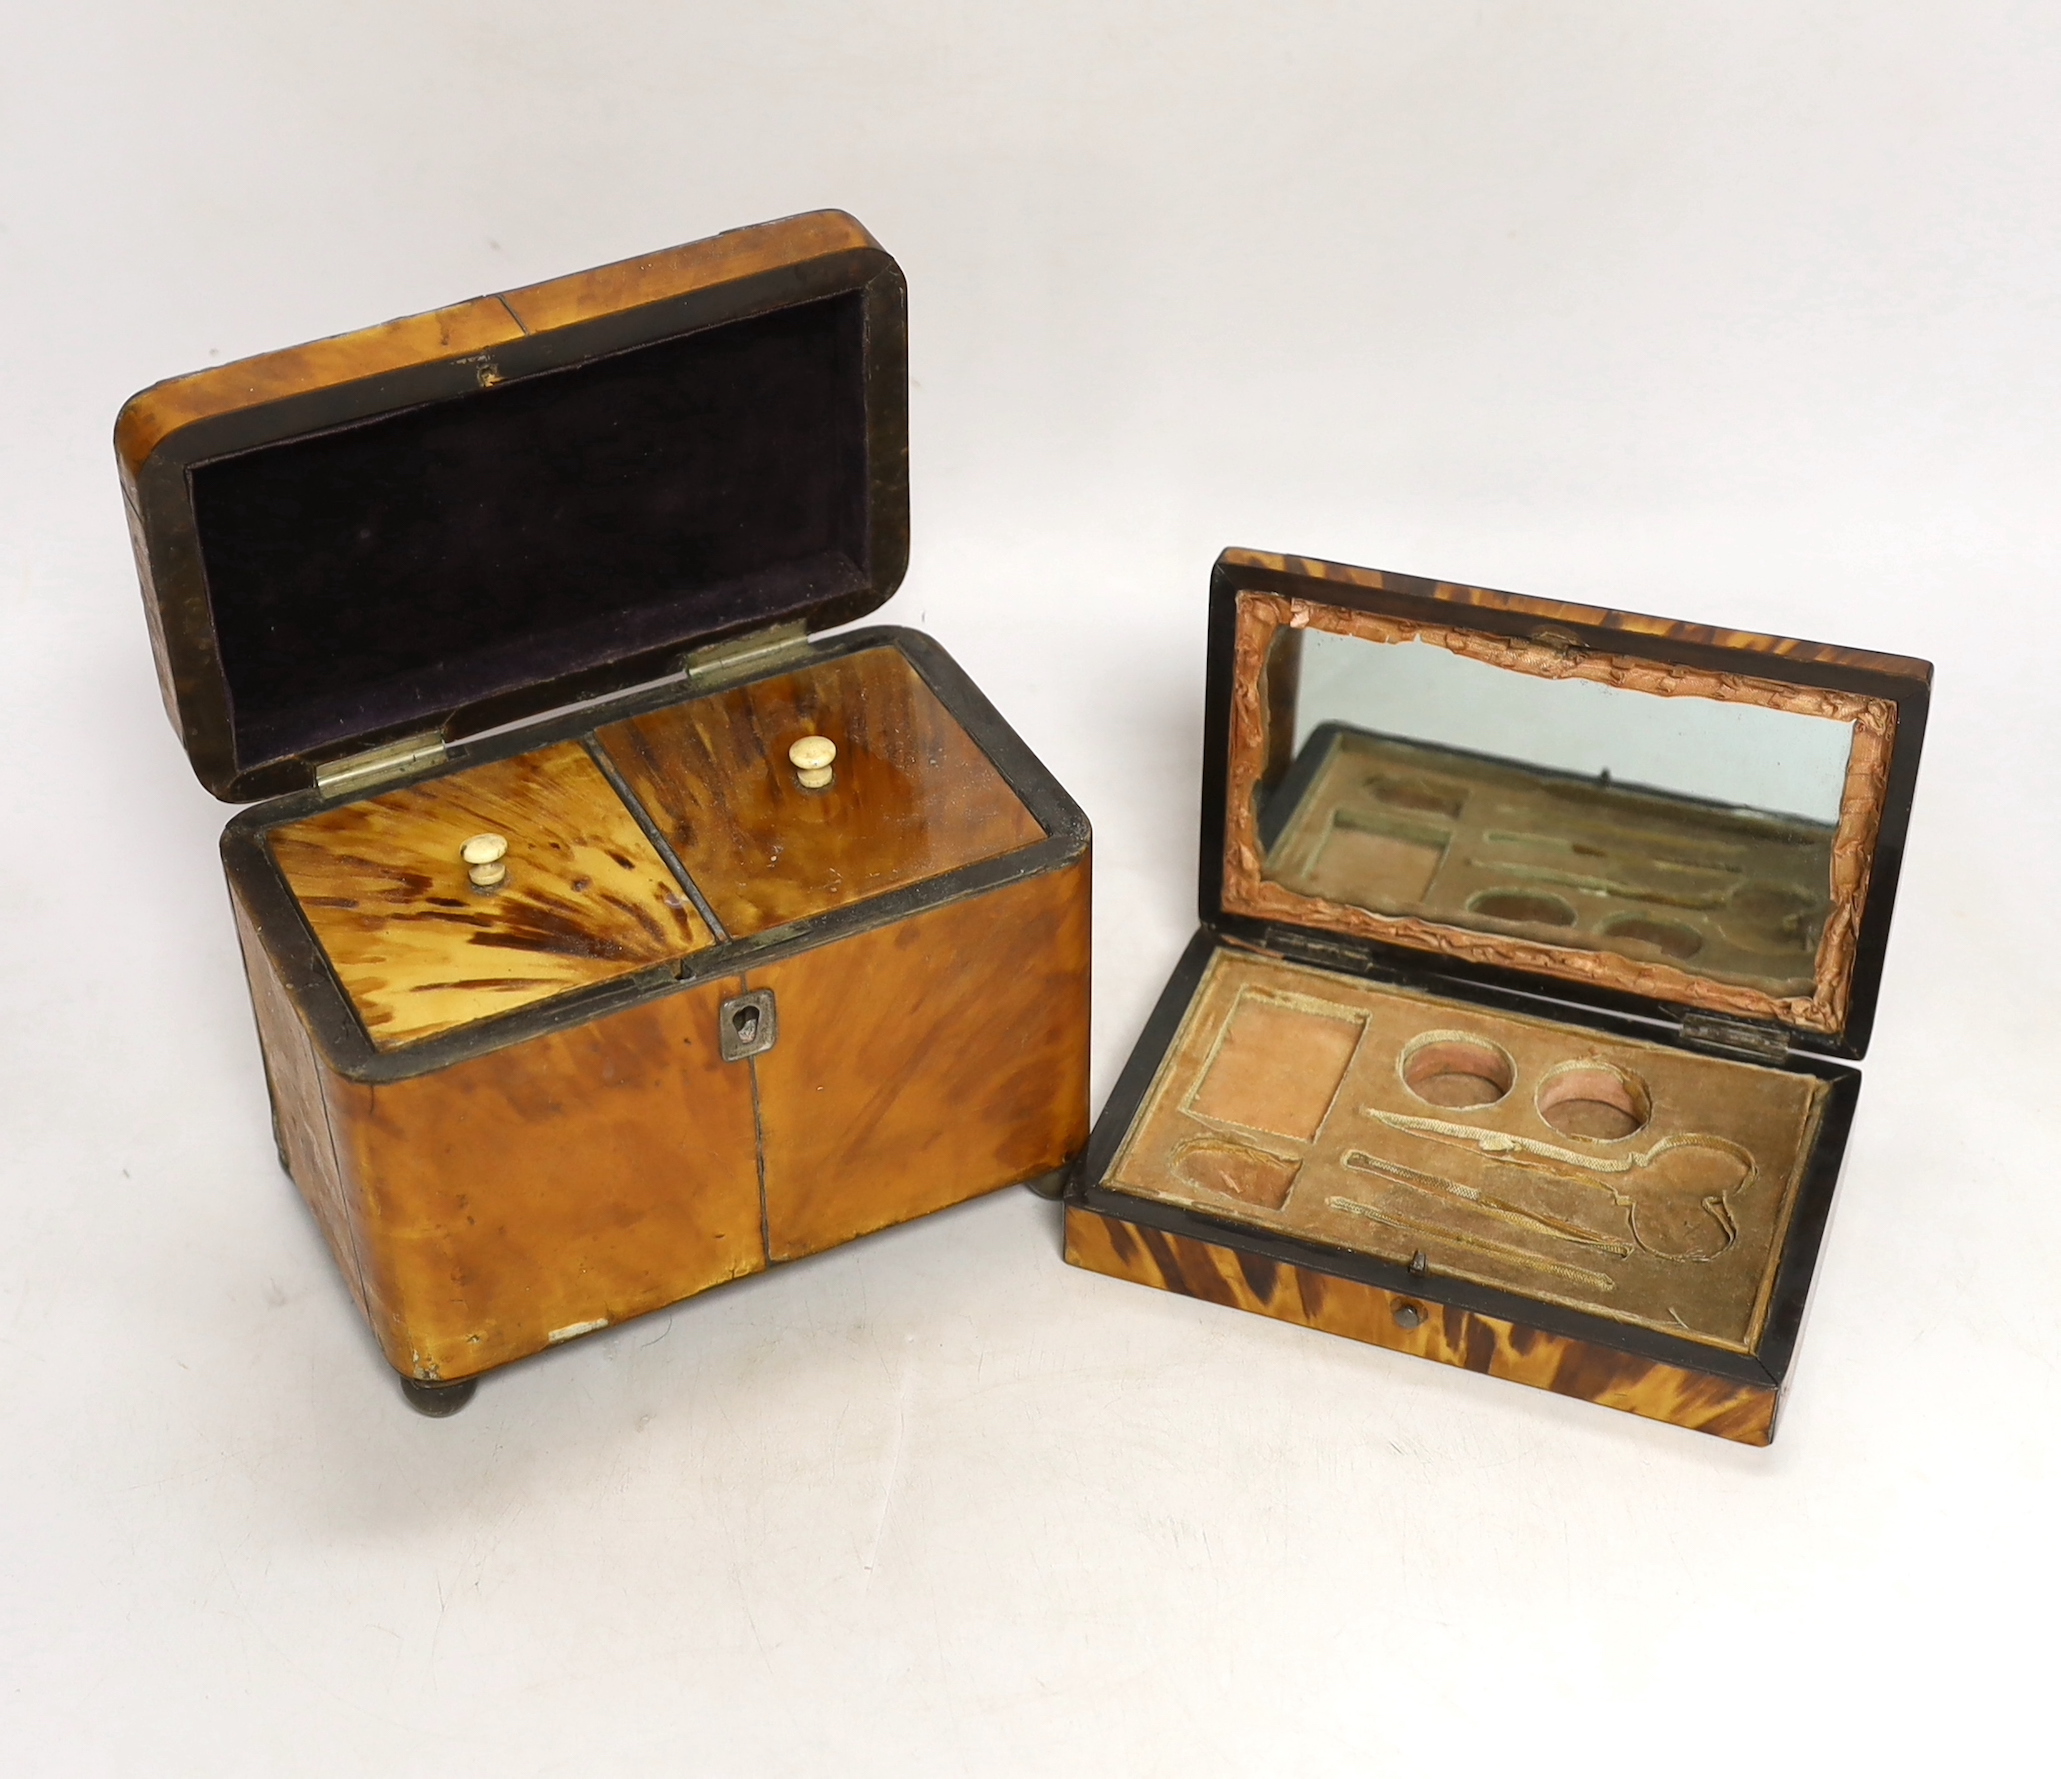 A 19th century two section tortoiseshell tea caddy on ball feet, a tortoiseshell necessaire case and a tortoiseshell and mother of pearl inlaid card case. tea caddy 15cm wide x 11cm high x 9cm deep CITES Submission refer